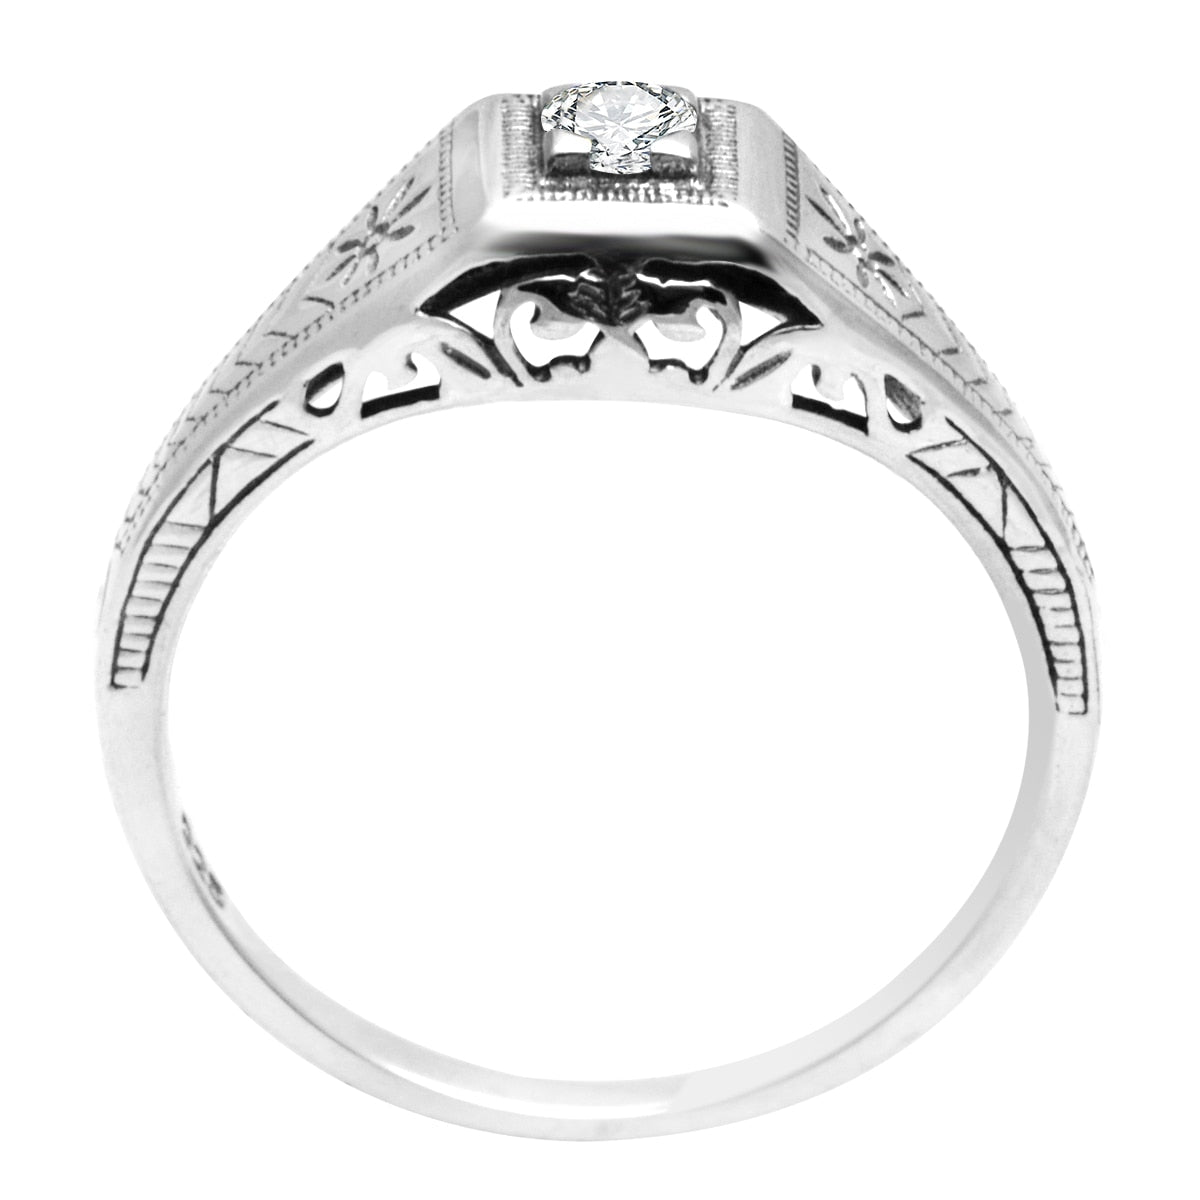 A silver vintage inspired Edwardian style ring set with a small round moissanite.